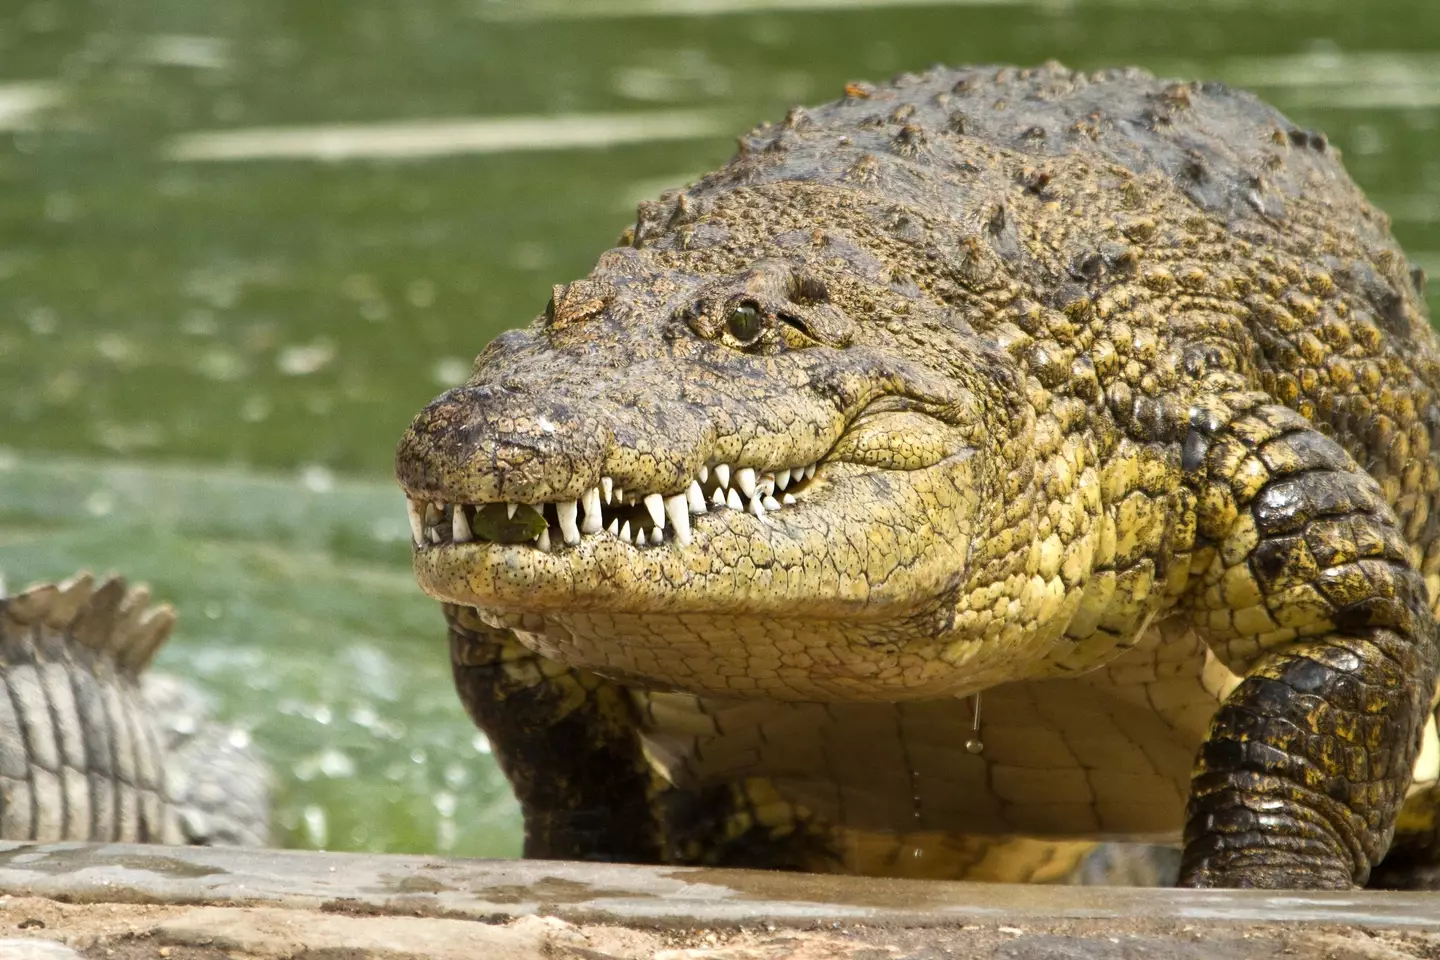 A crocodile kept alone in captivity for 16 years was able to lay eggs with fully formed foetuses inside.